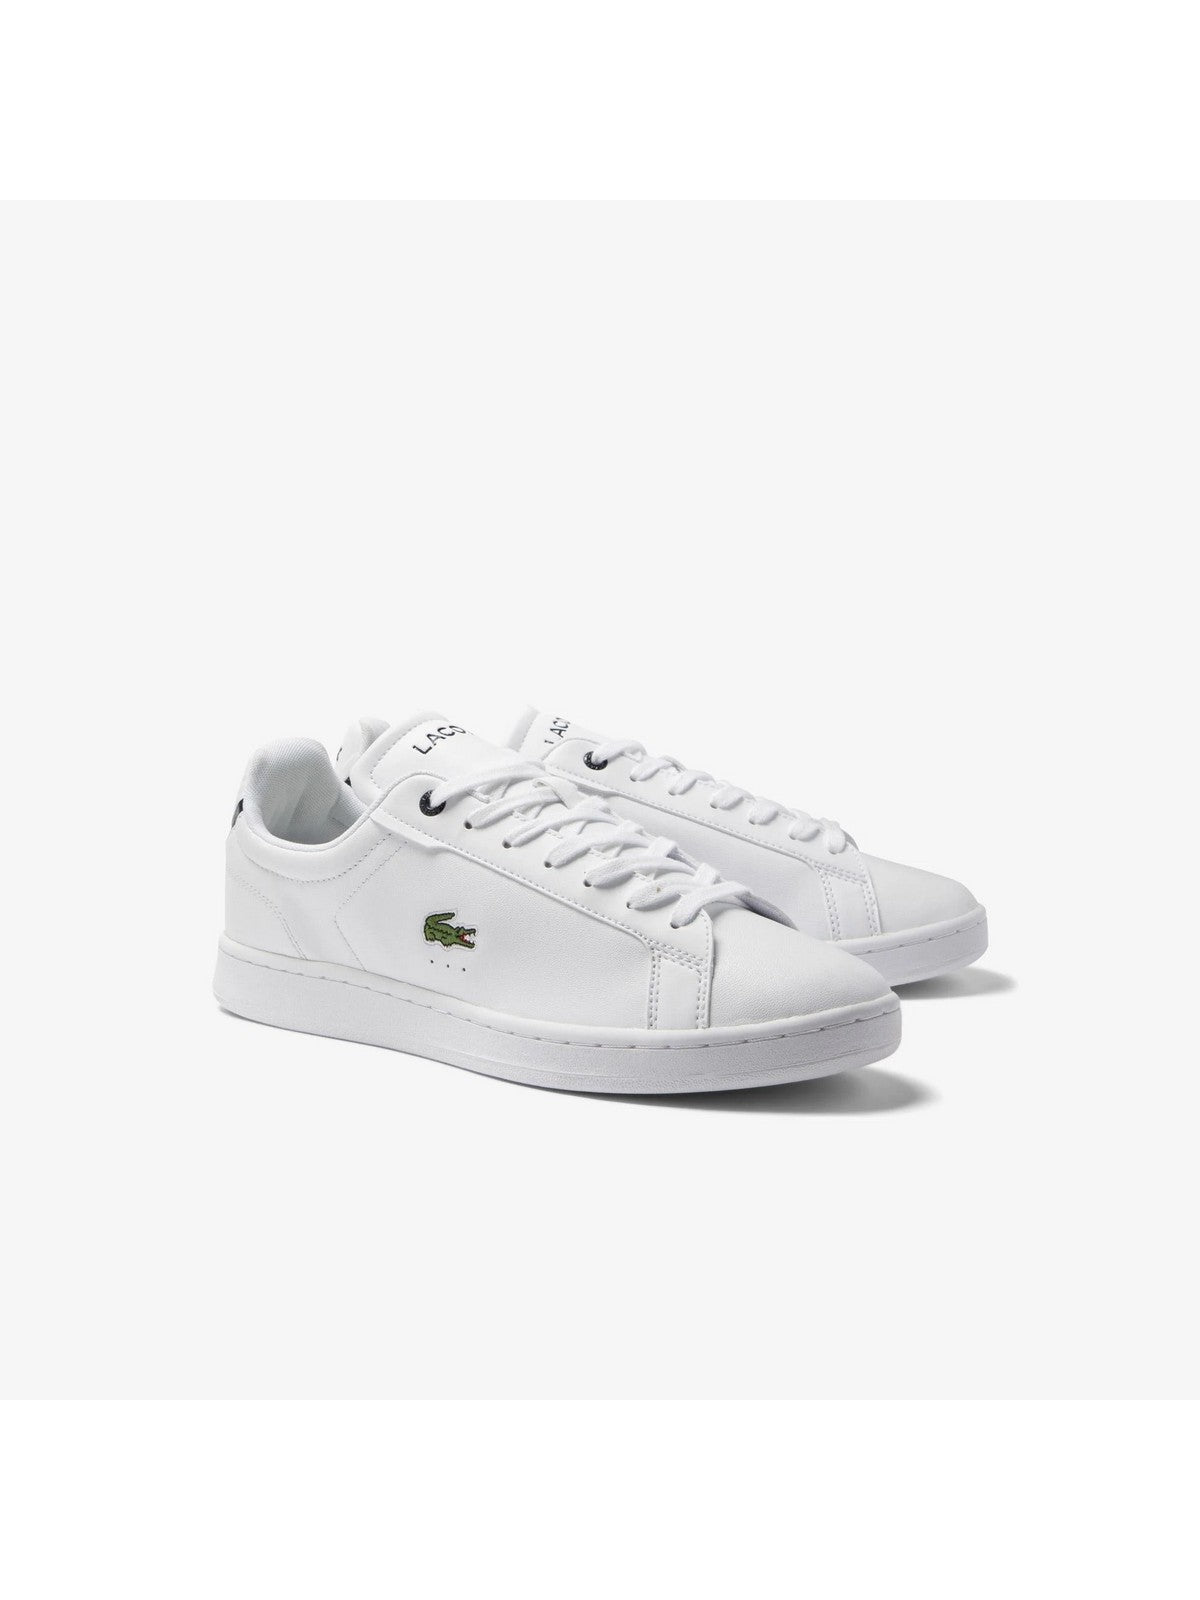 LACOSTE Homme Sneaker CARNABY PRO BL23 1 745SMA0110 042 Blanc